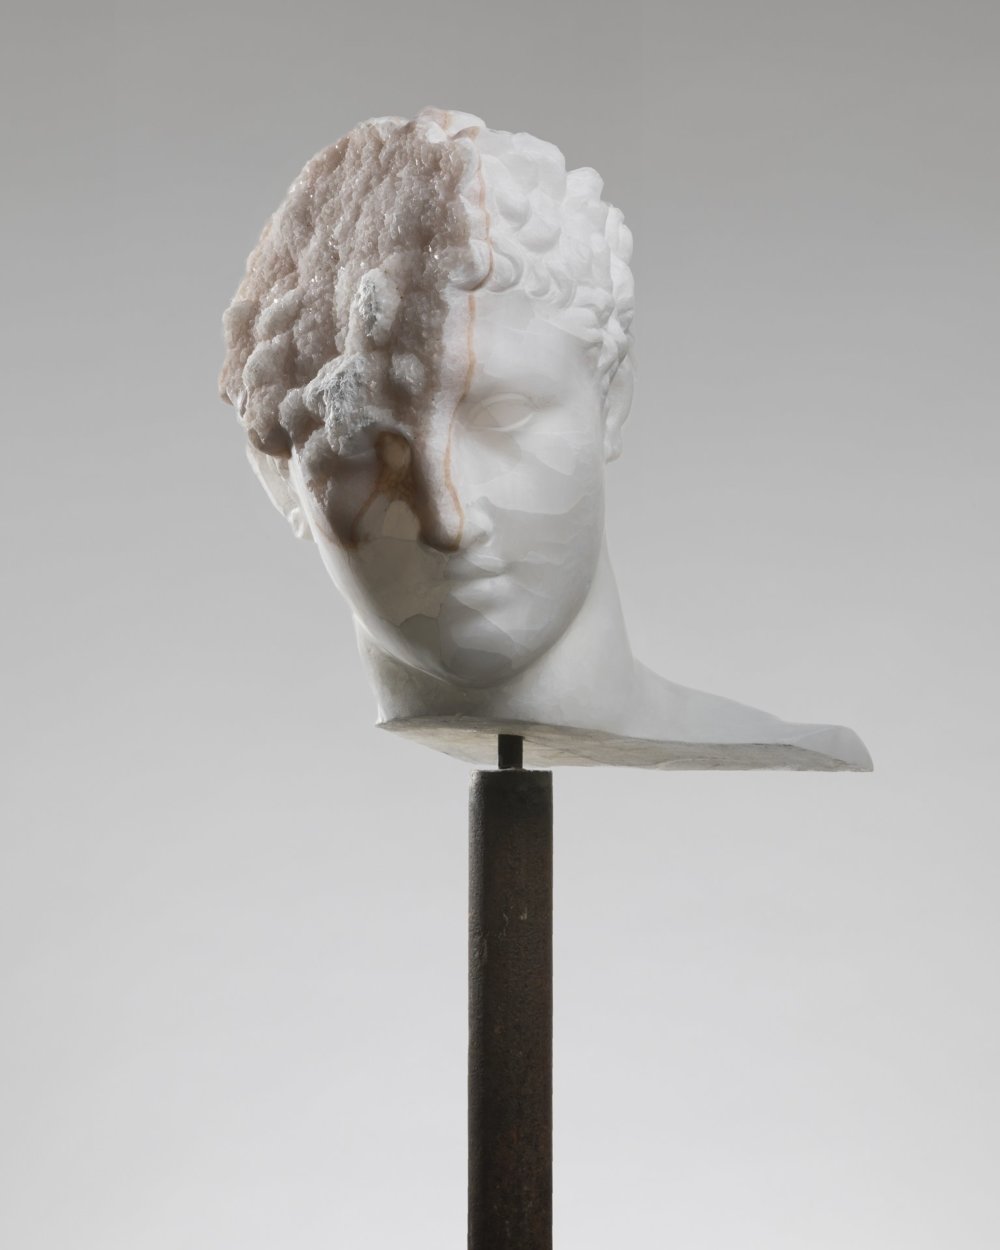 The Beauty Of Imperfection Fragmented Classical Sculptures By Massimiliano Pelletti 11